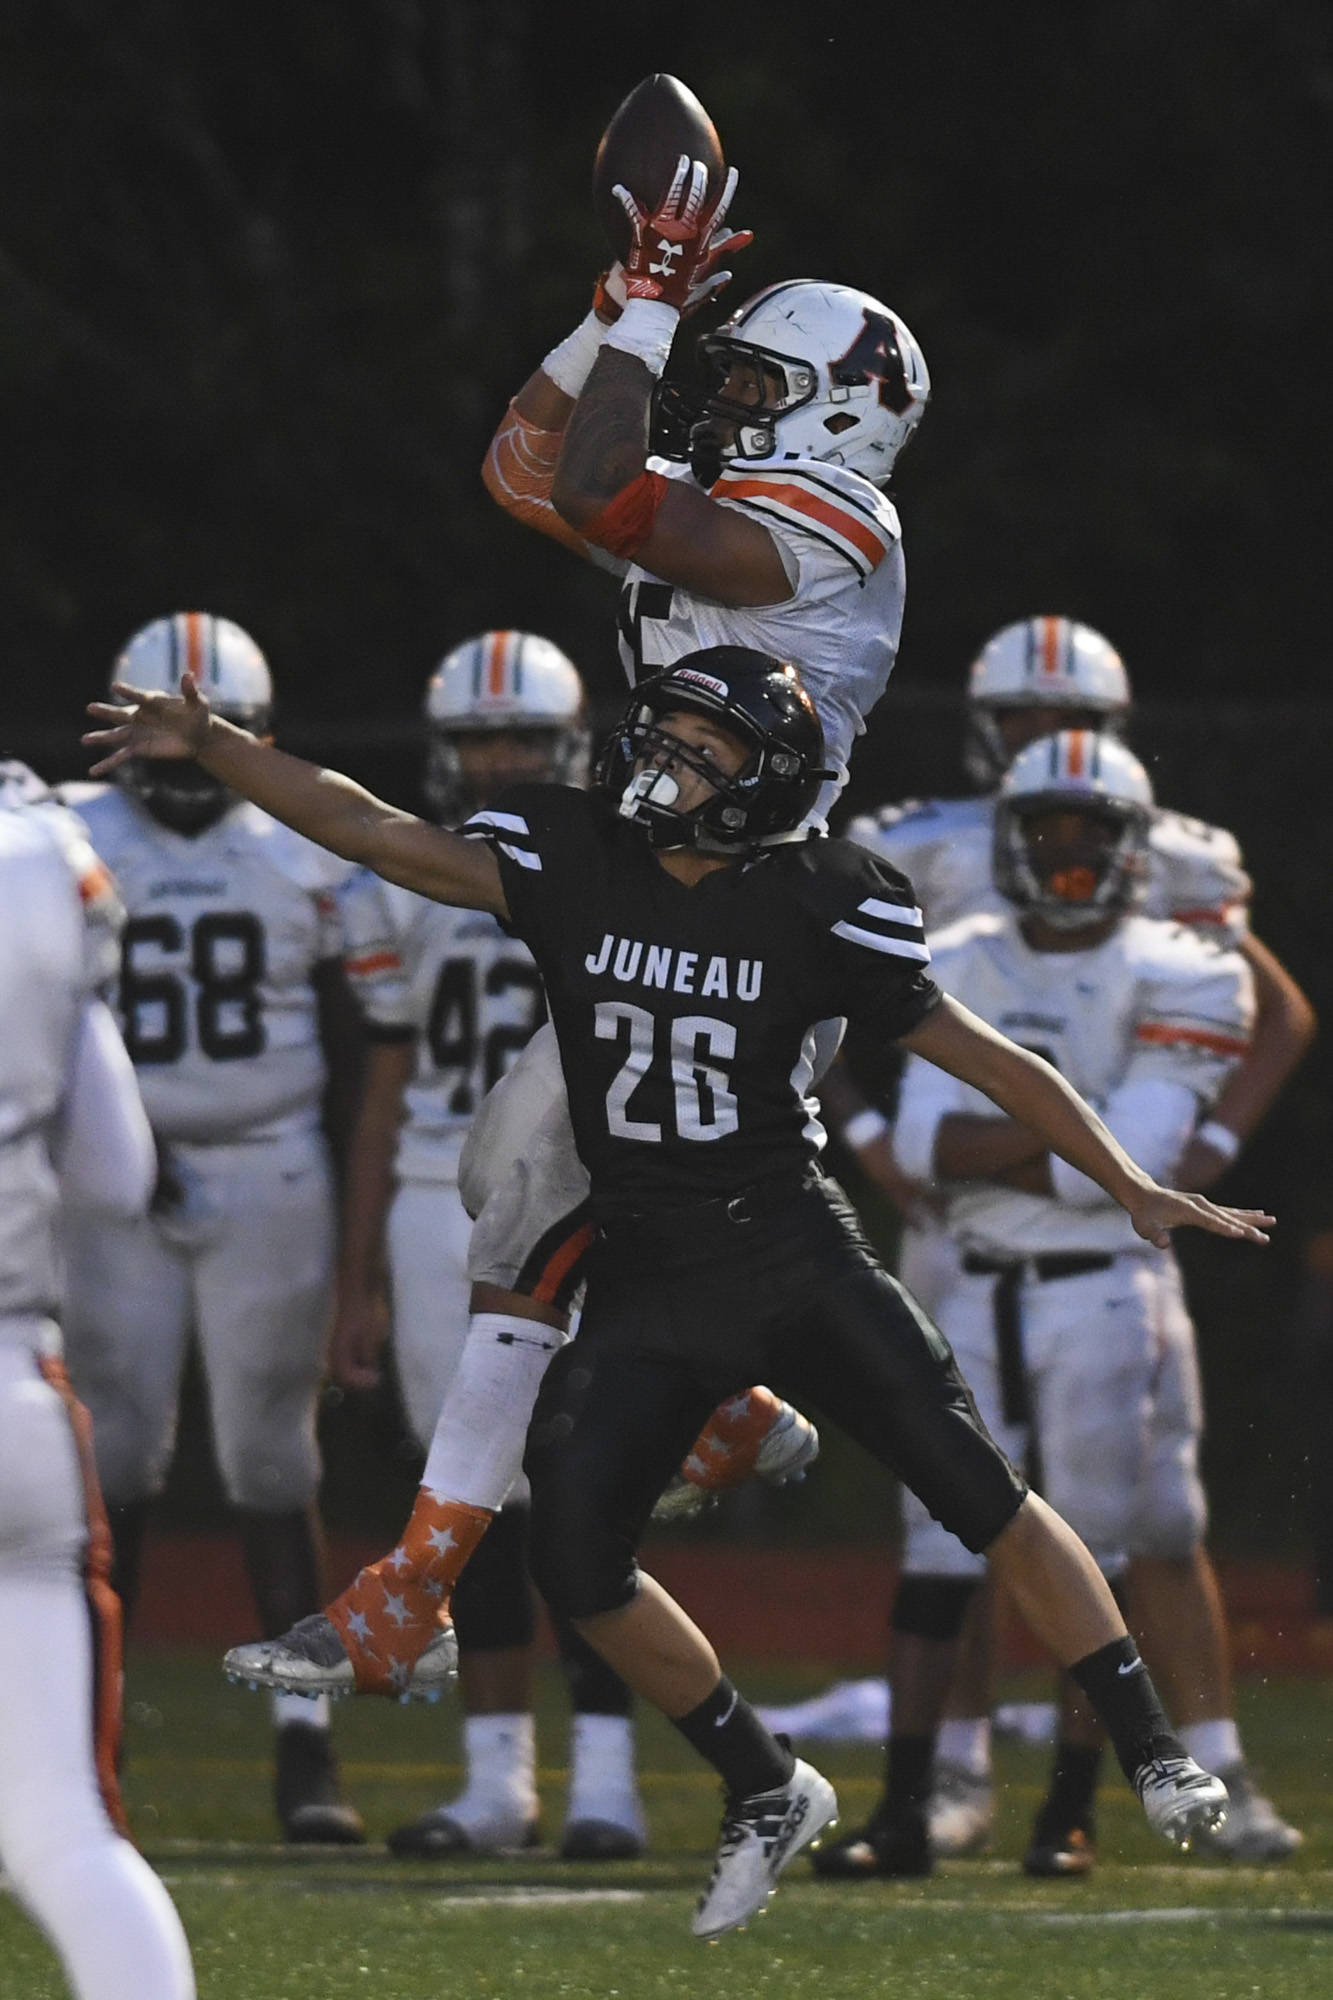 West’s Dhar Montalbo catches a pass over Juneau’s Jamal Johnson in the first quarter at Adair-Kennedy Memorial Field on Friday, Sept. 13, 2019. West won 43-14. (Michael Penn | Juneau Empire)